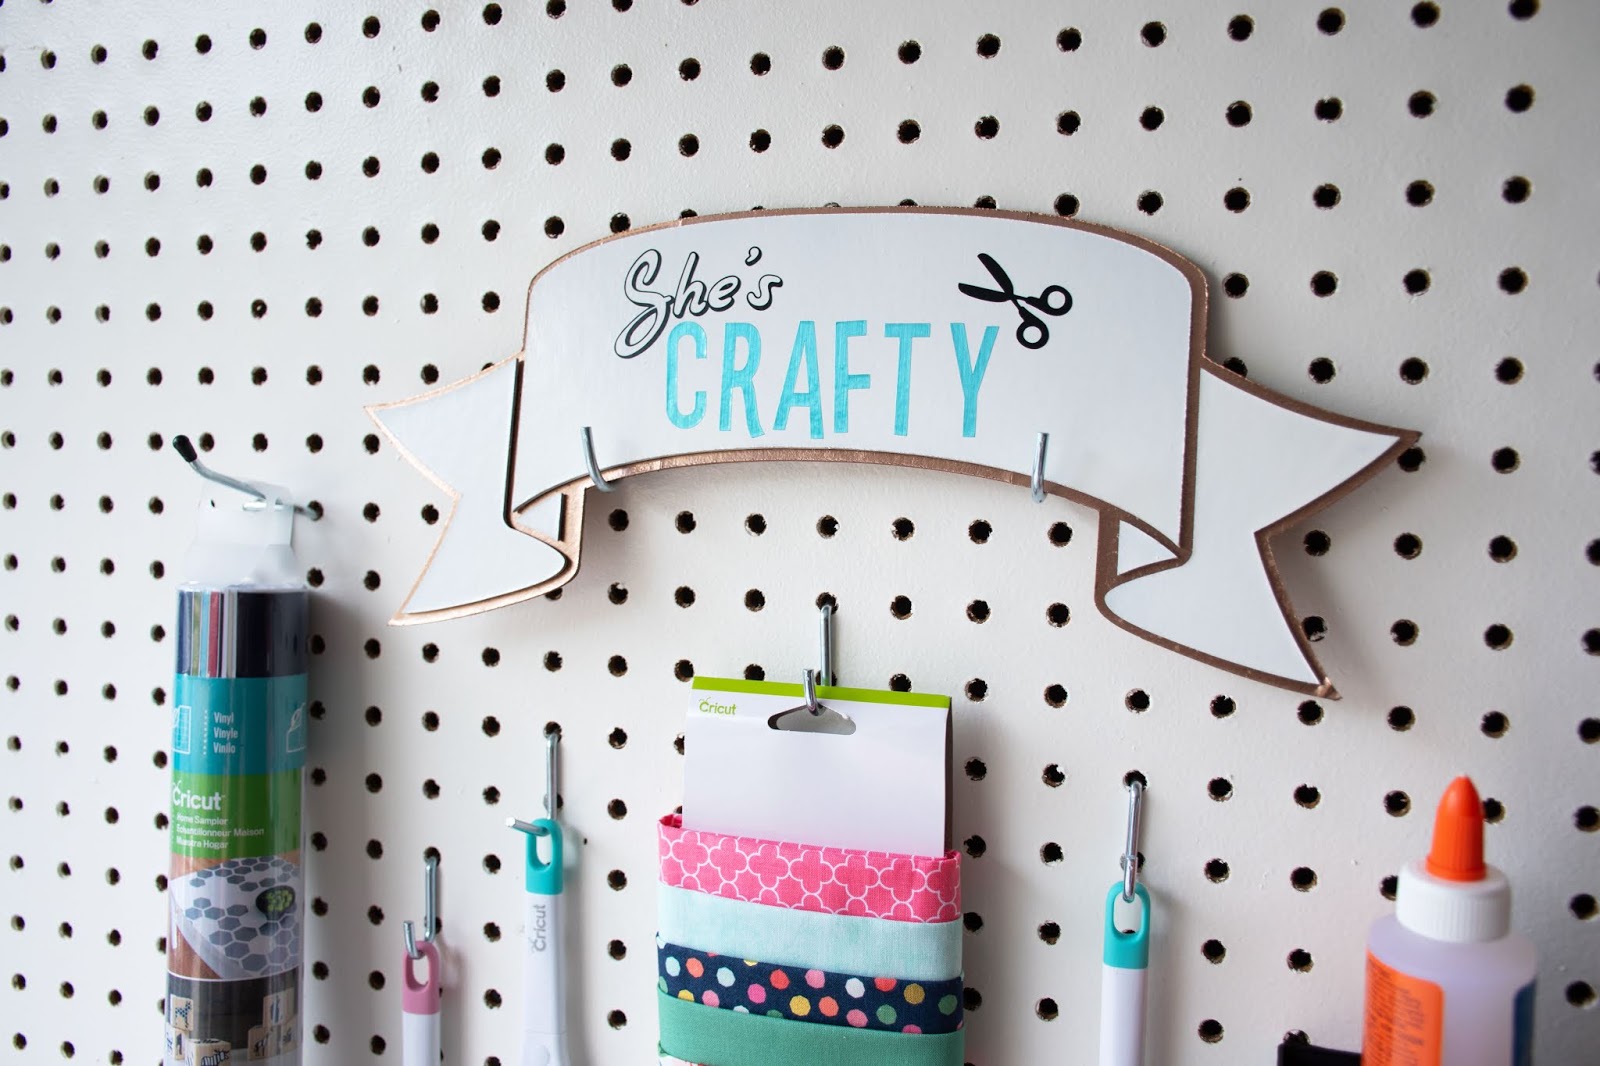 How to Cut Chipboard with the Cricut Maker